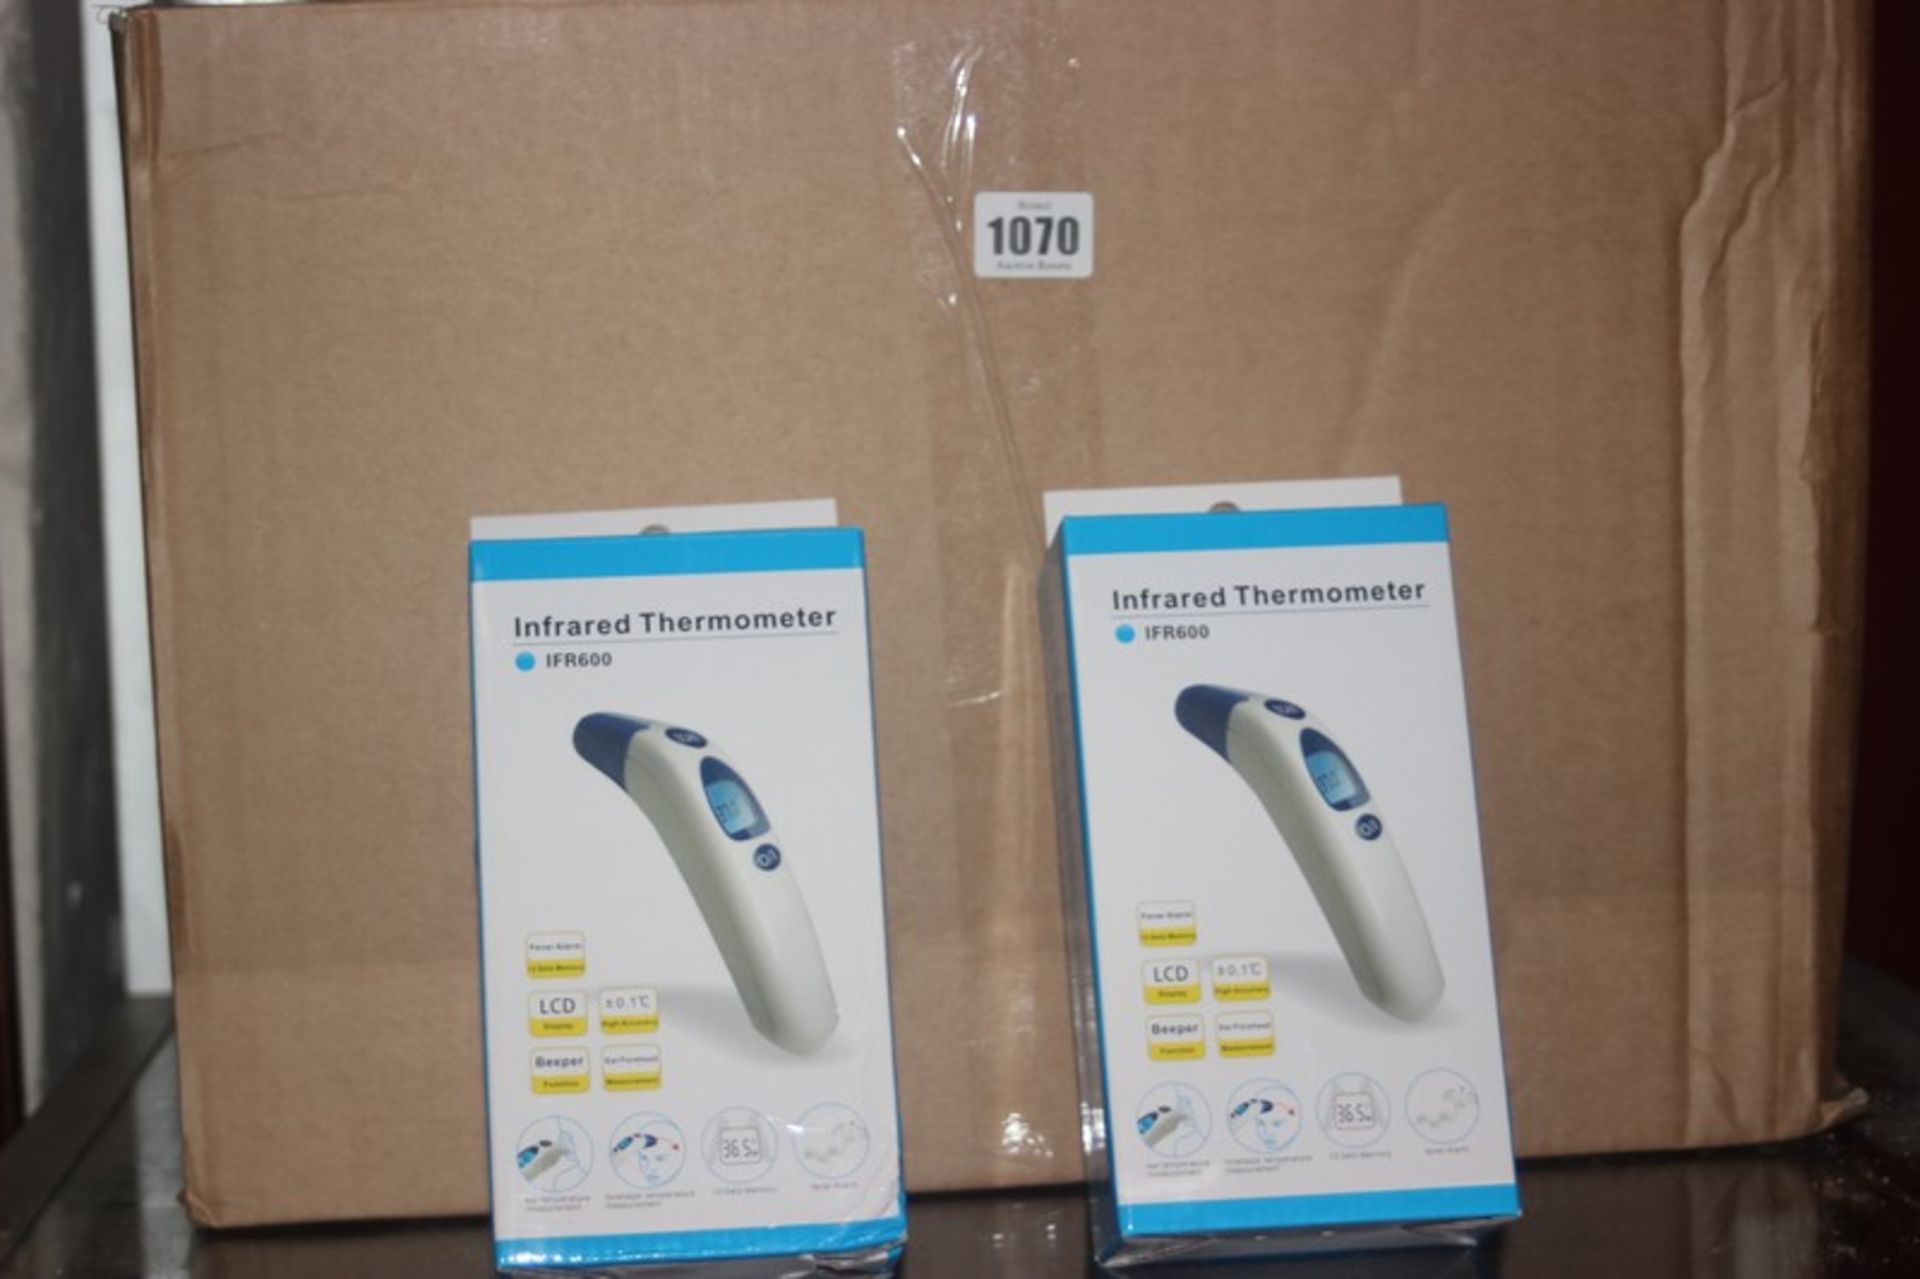 Twenty three as new Infrared Thermometer IFR600.